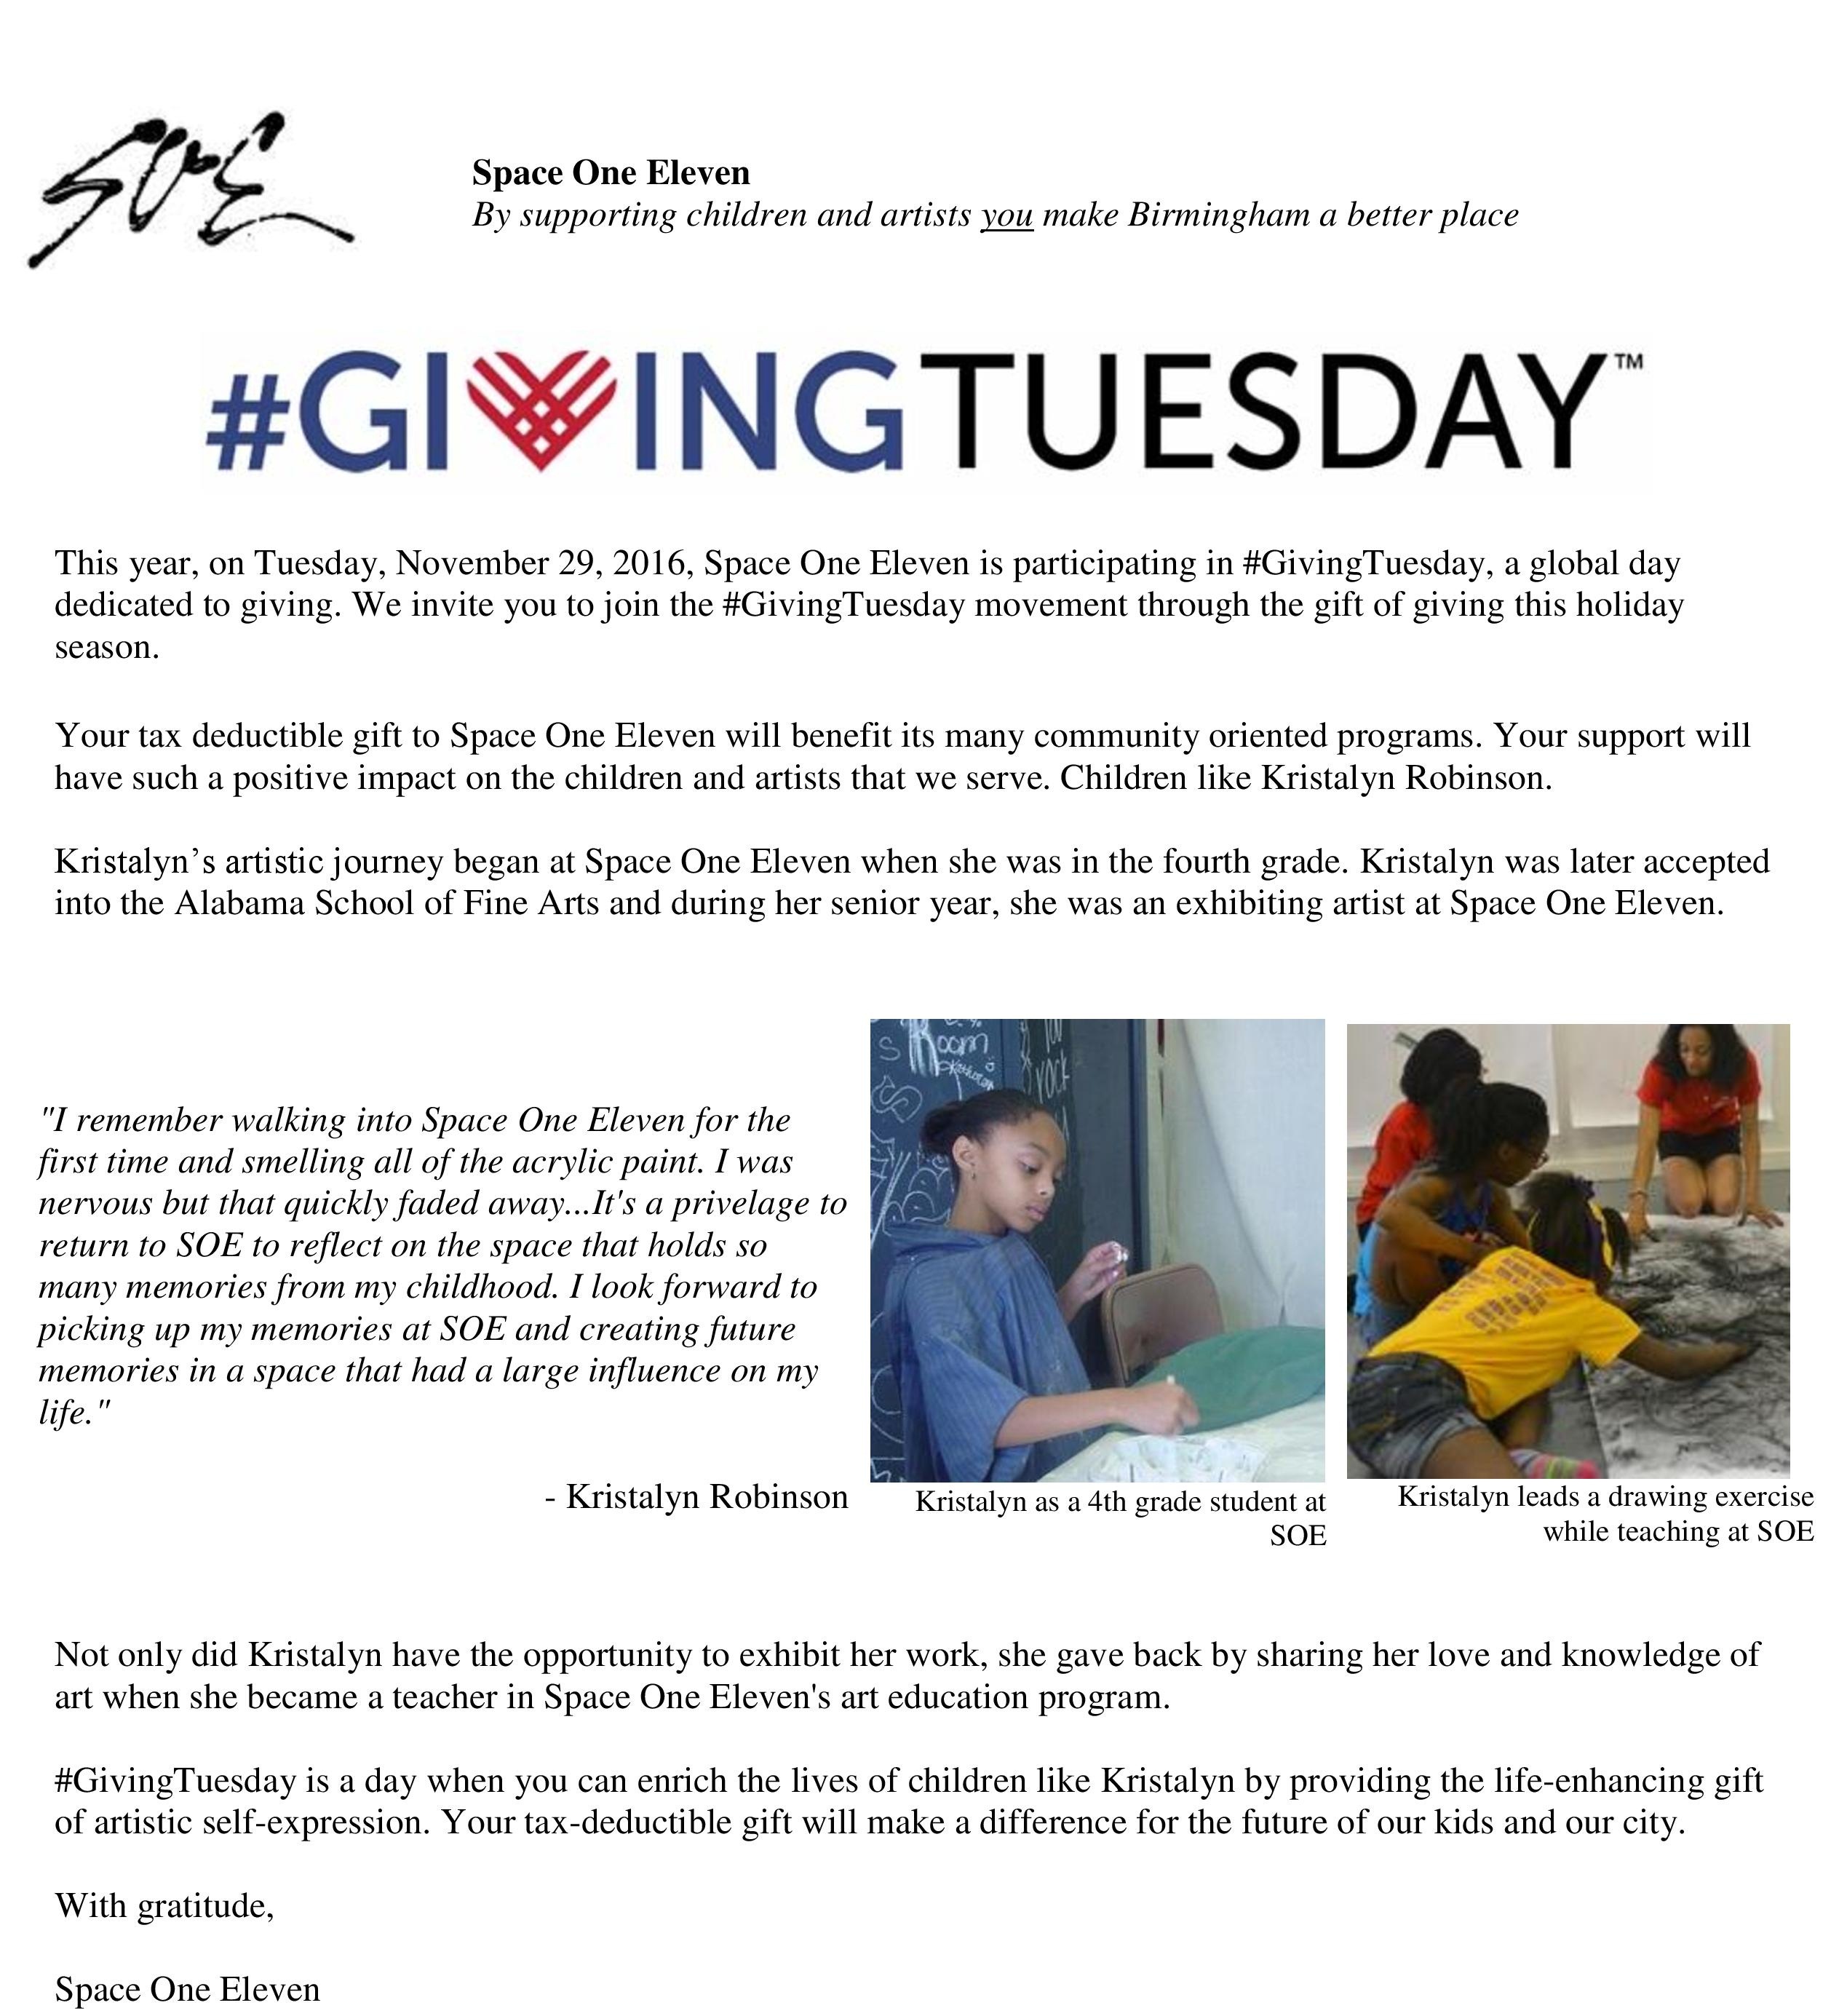 jpeg-givingtuesday-vr-email-blast-11-17-16-cf-docx-page-001